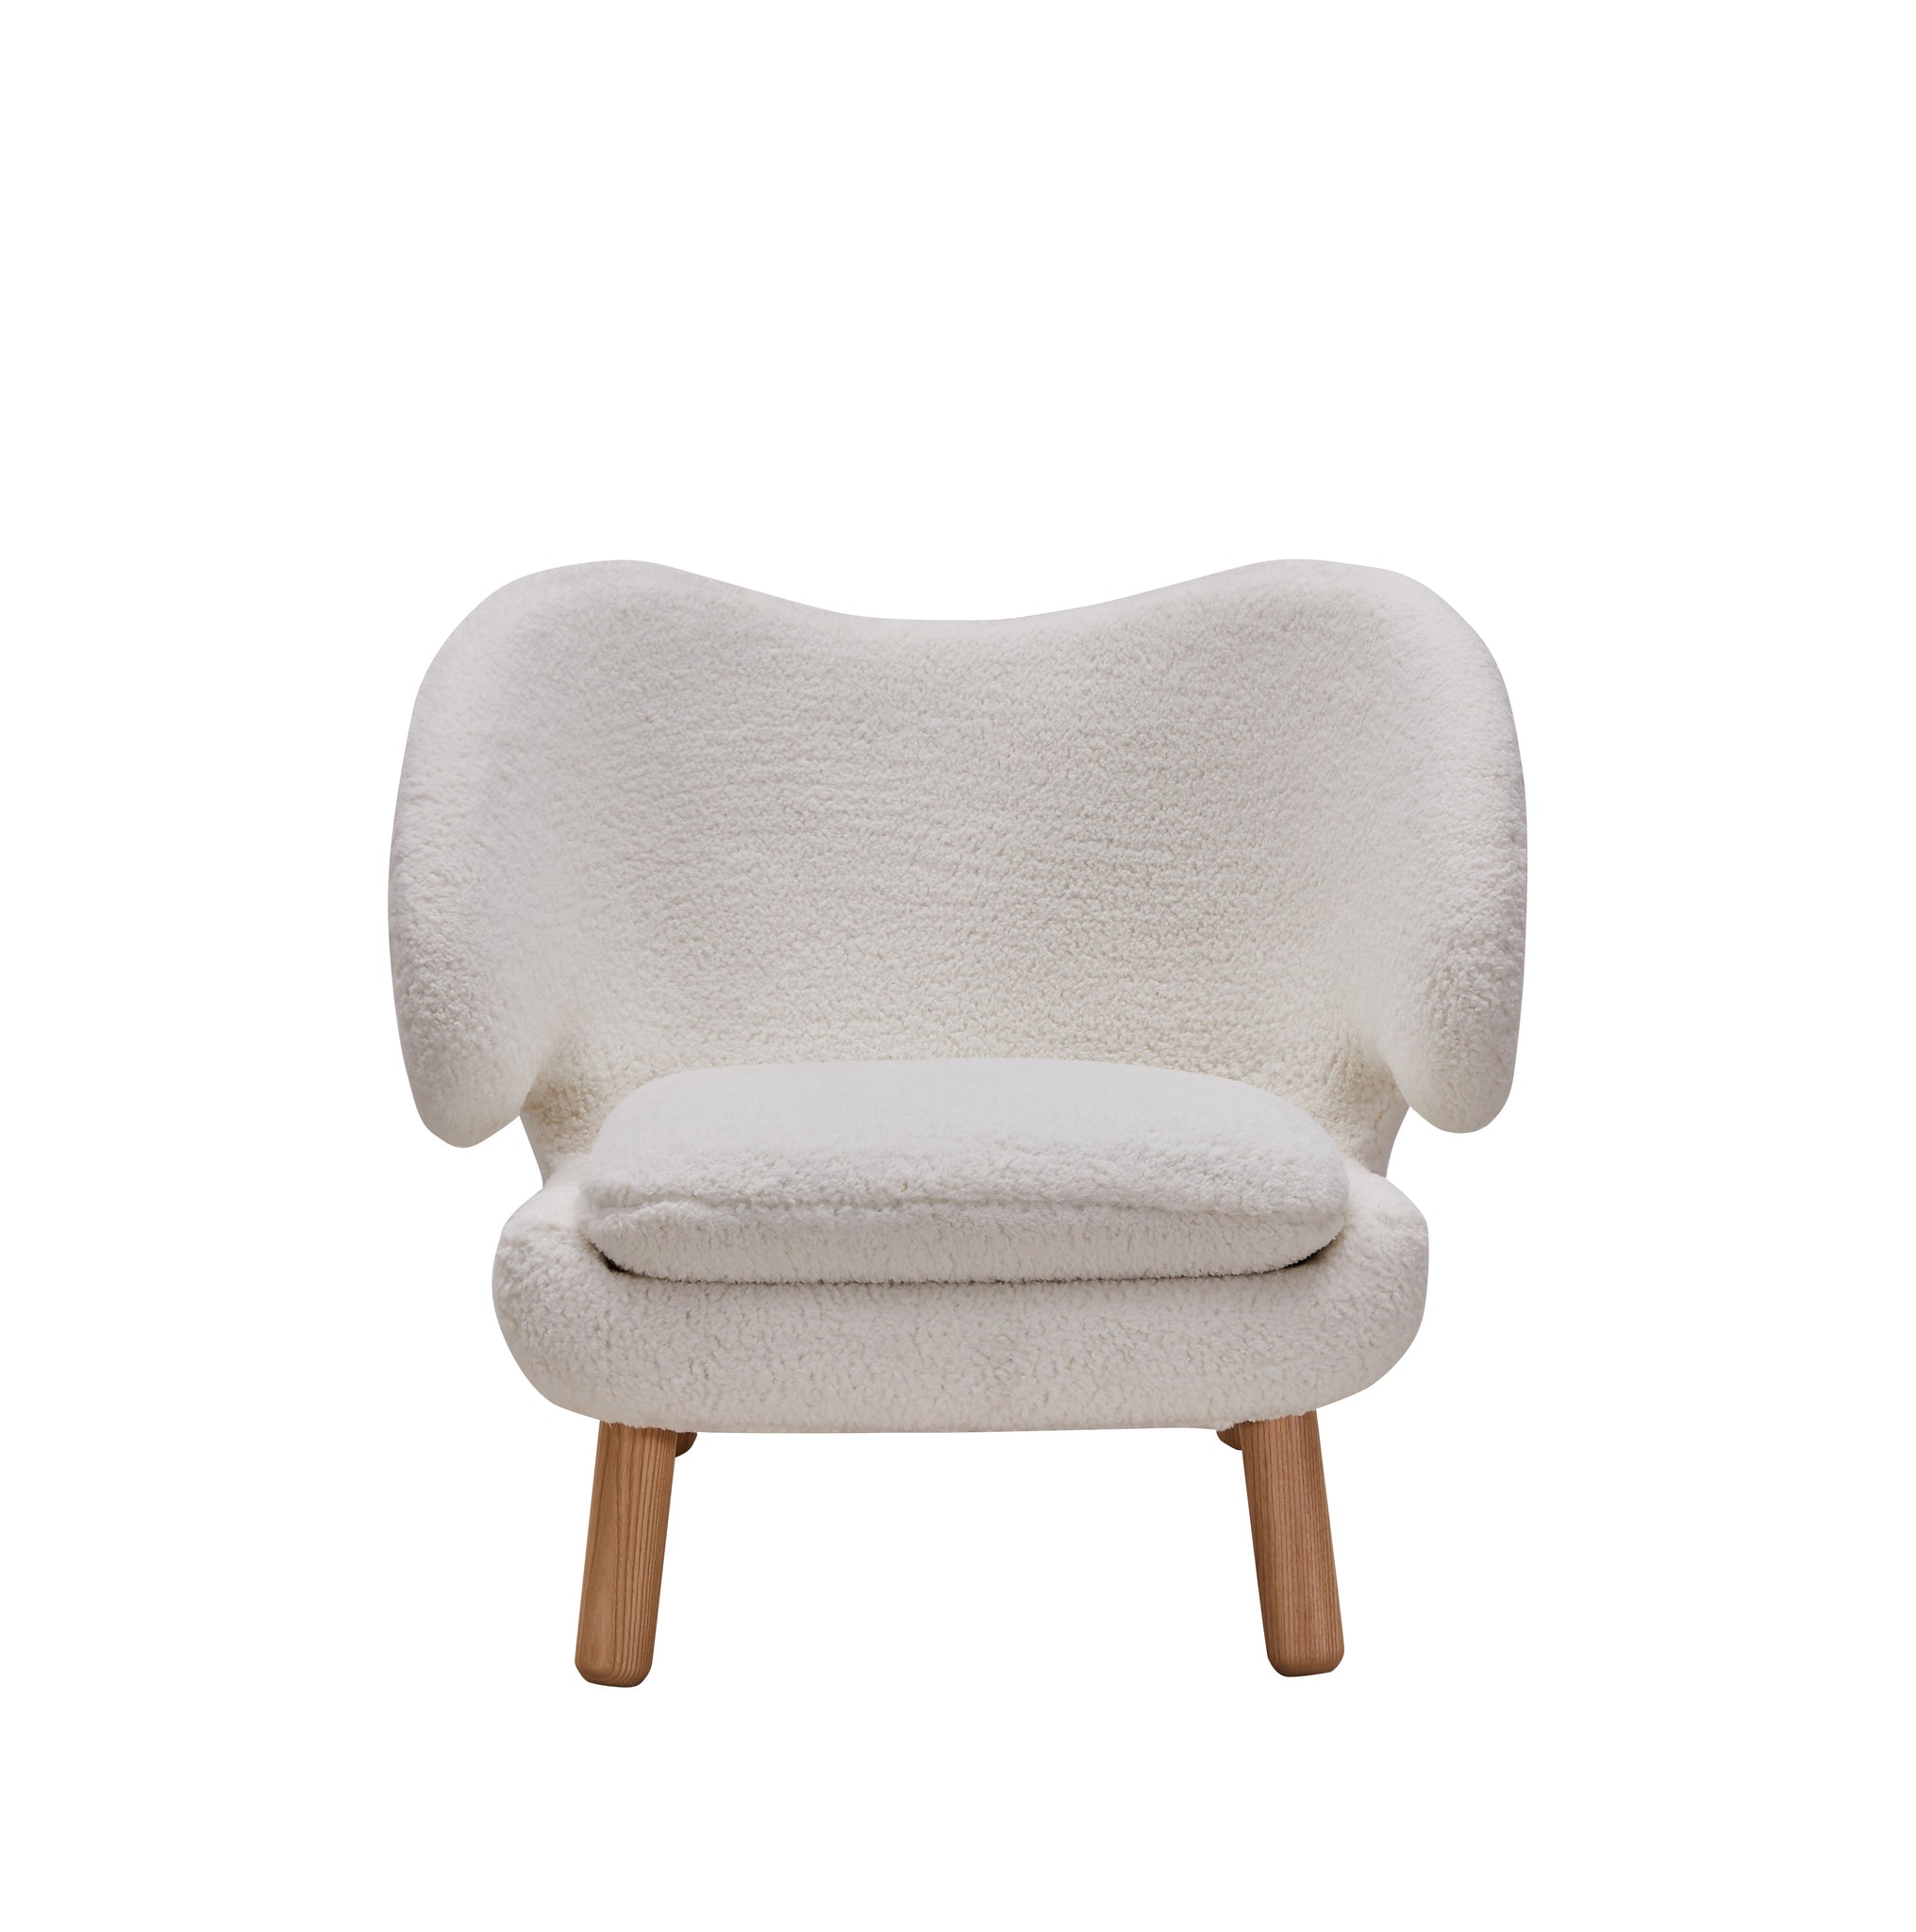 Zoey Accent Chair - White Sherpa